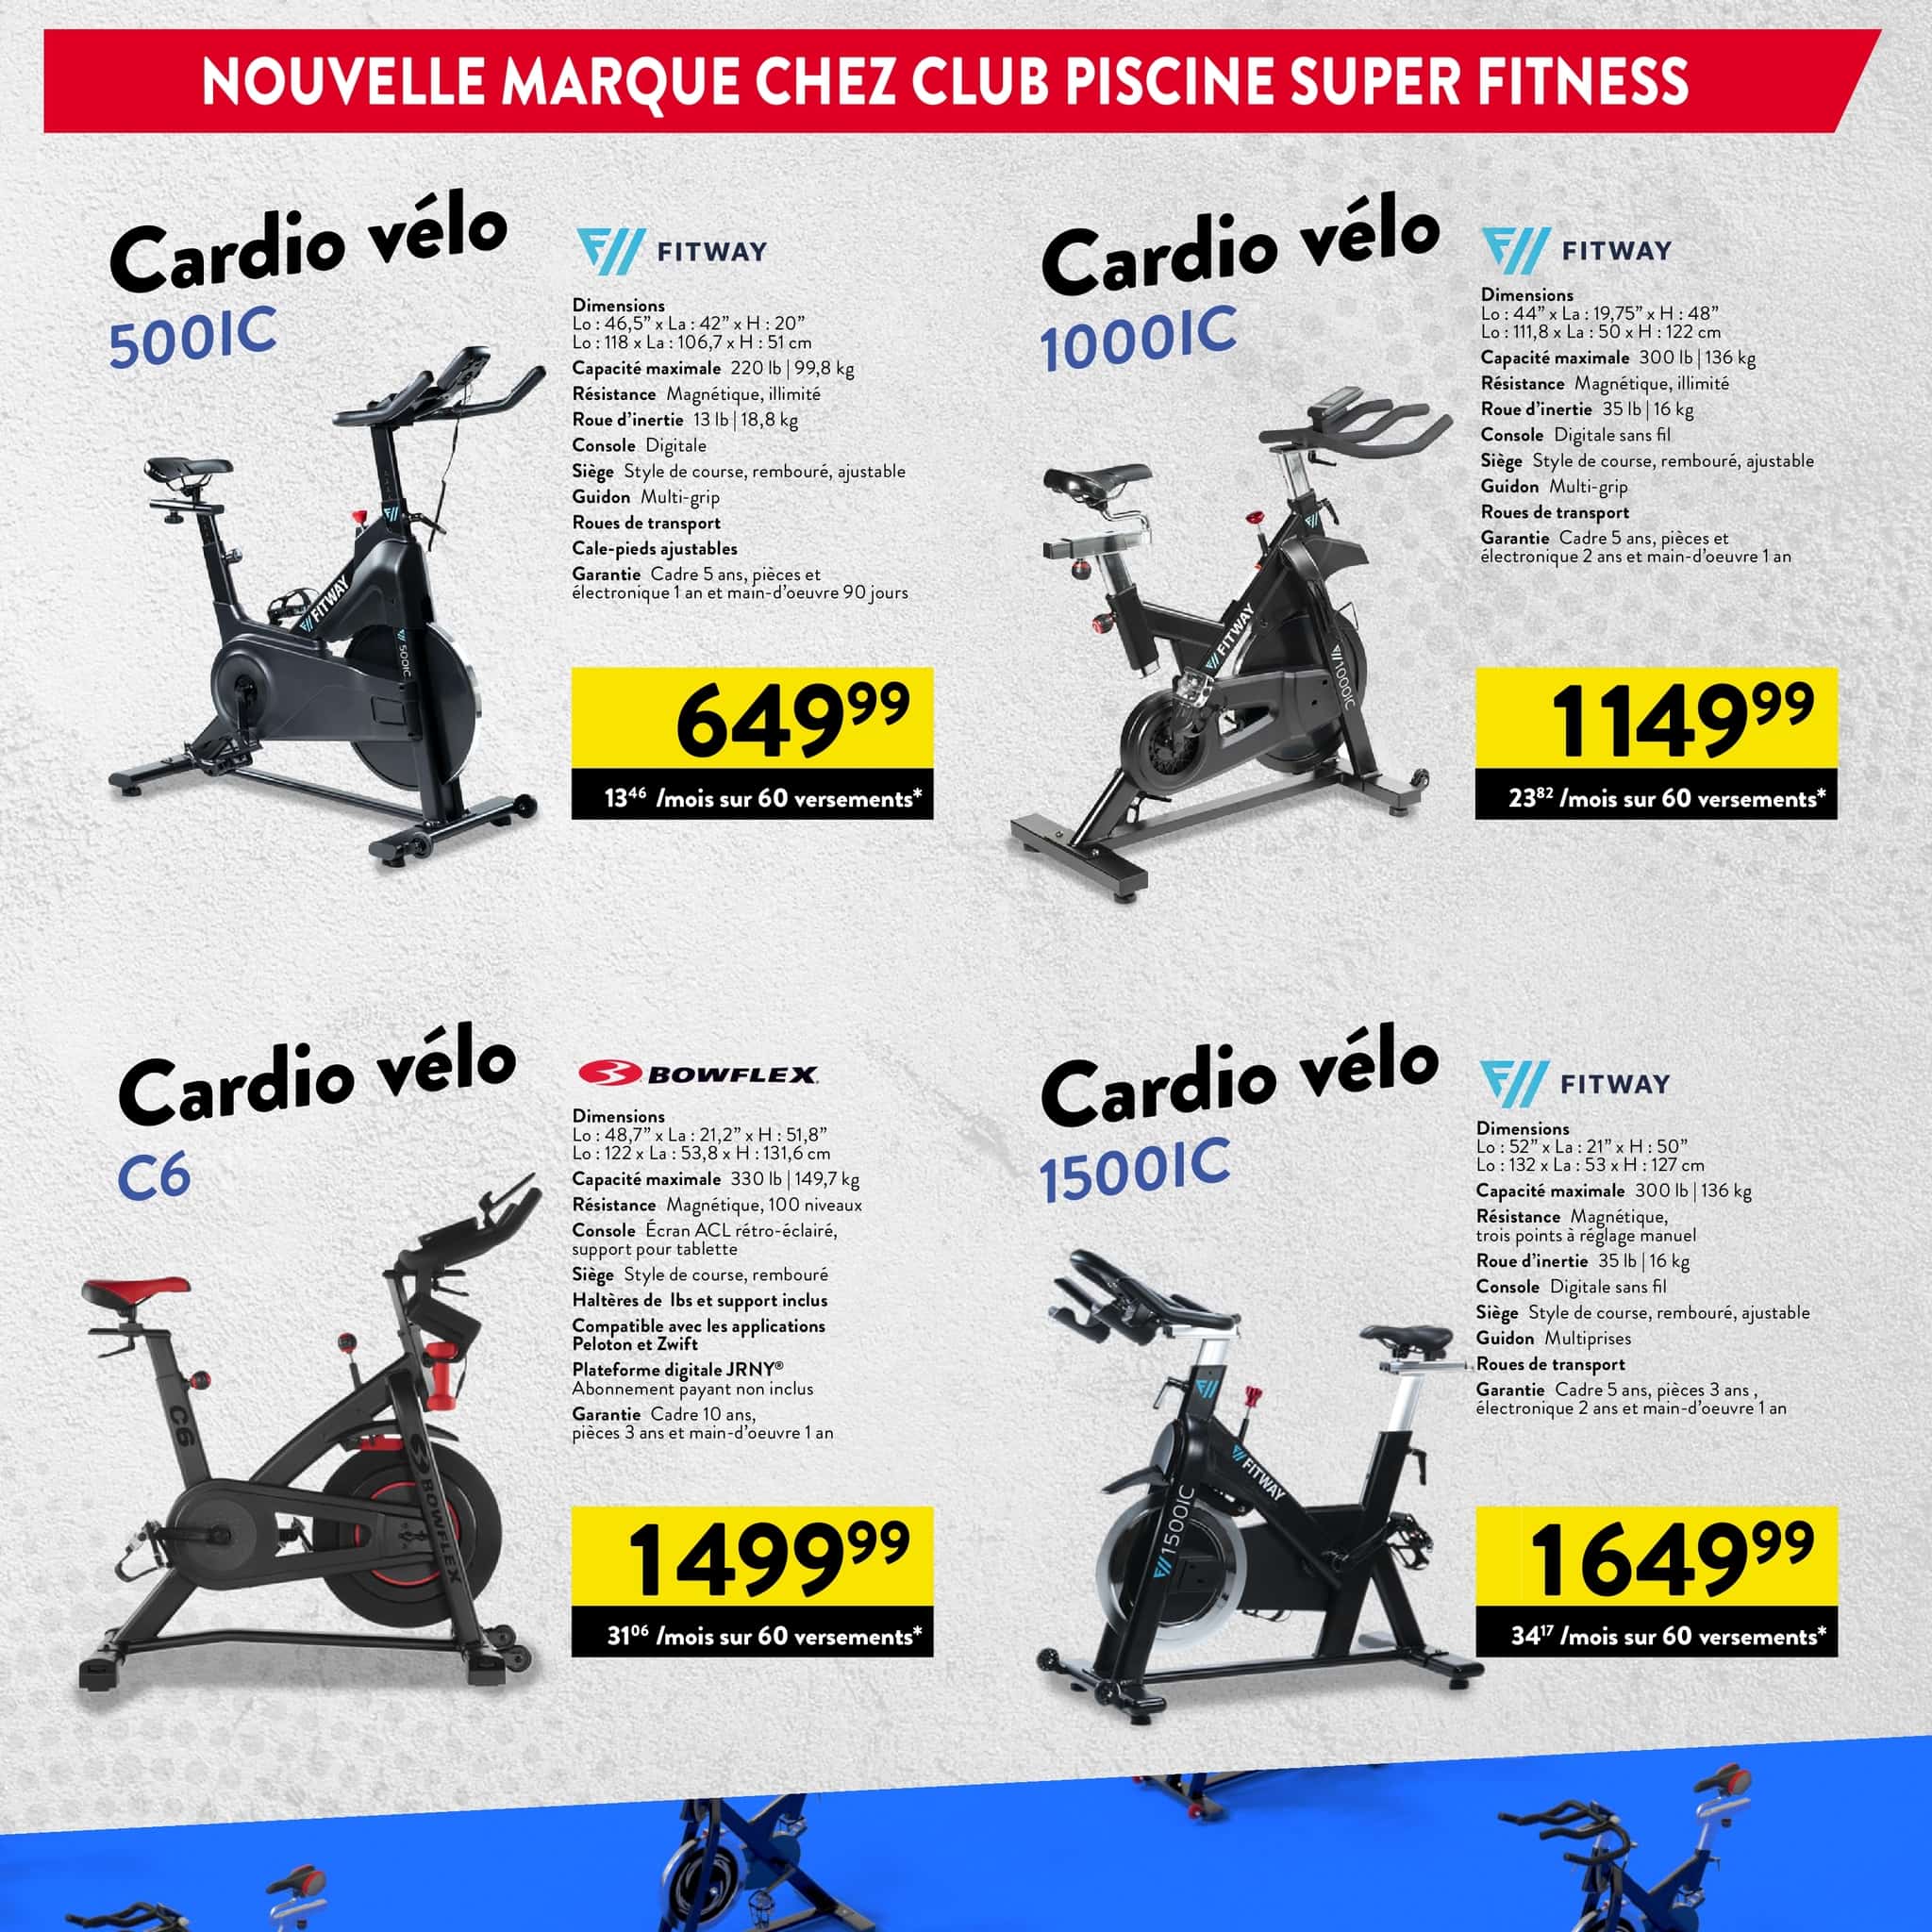 Circulaire Club Piscine Super Fitness - Page 7